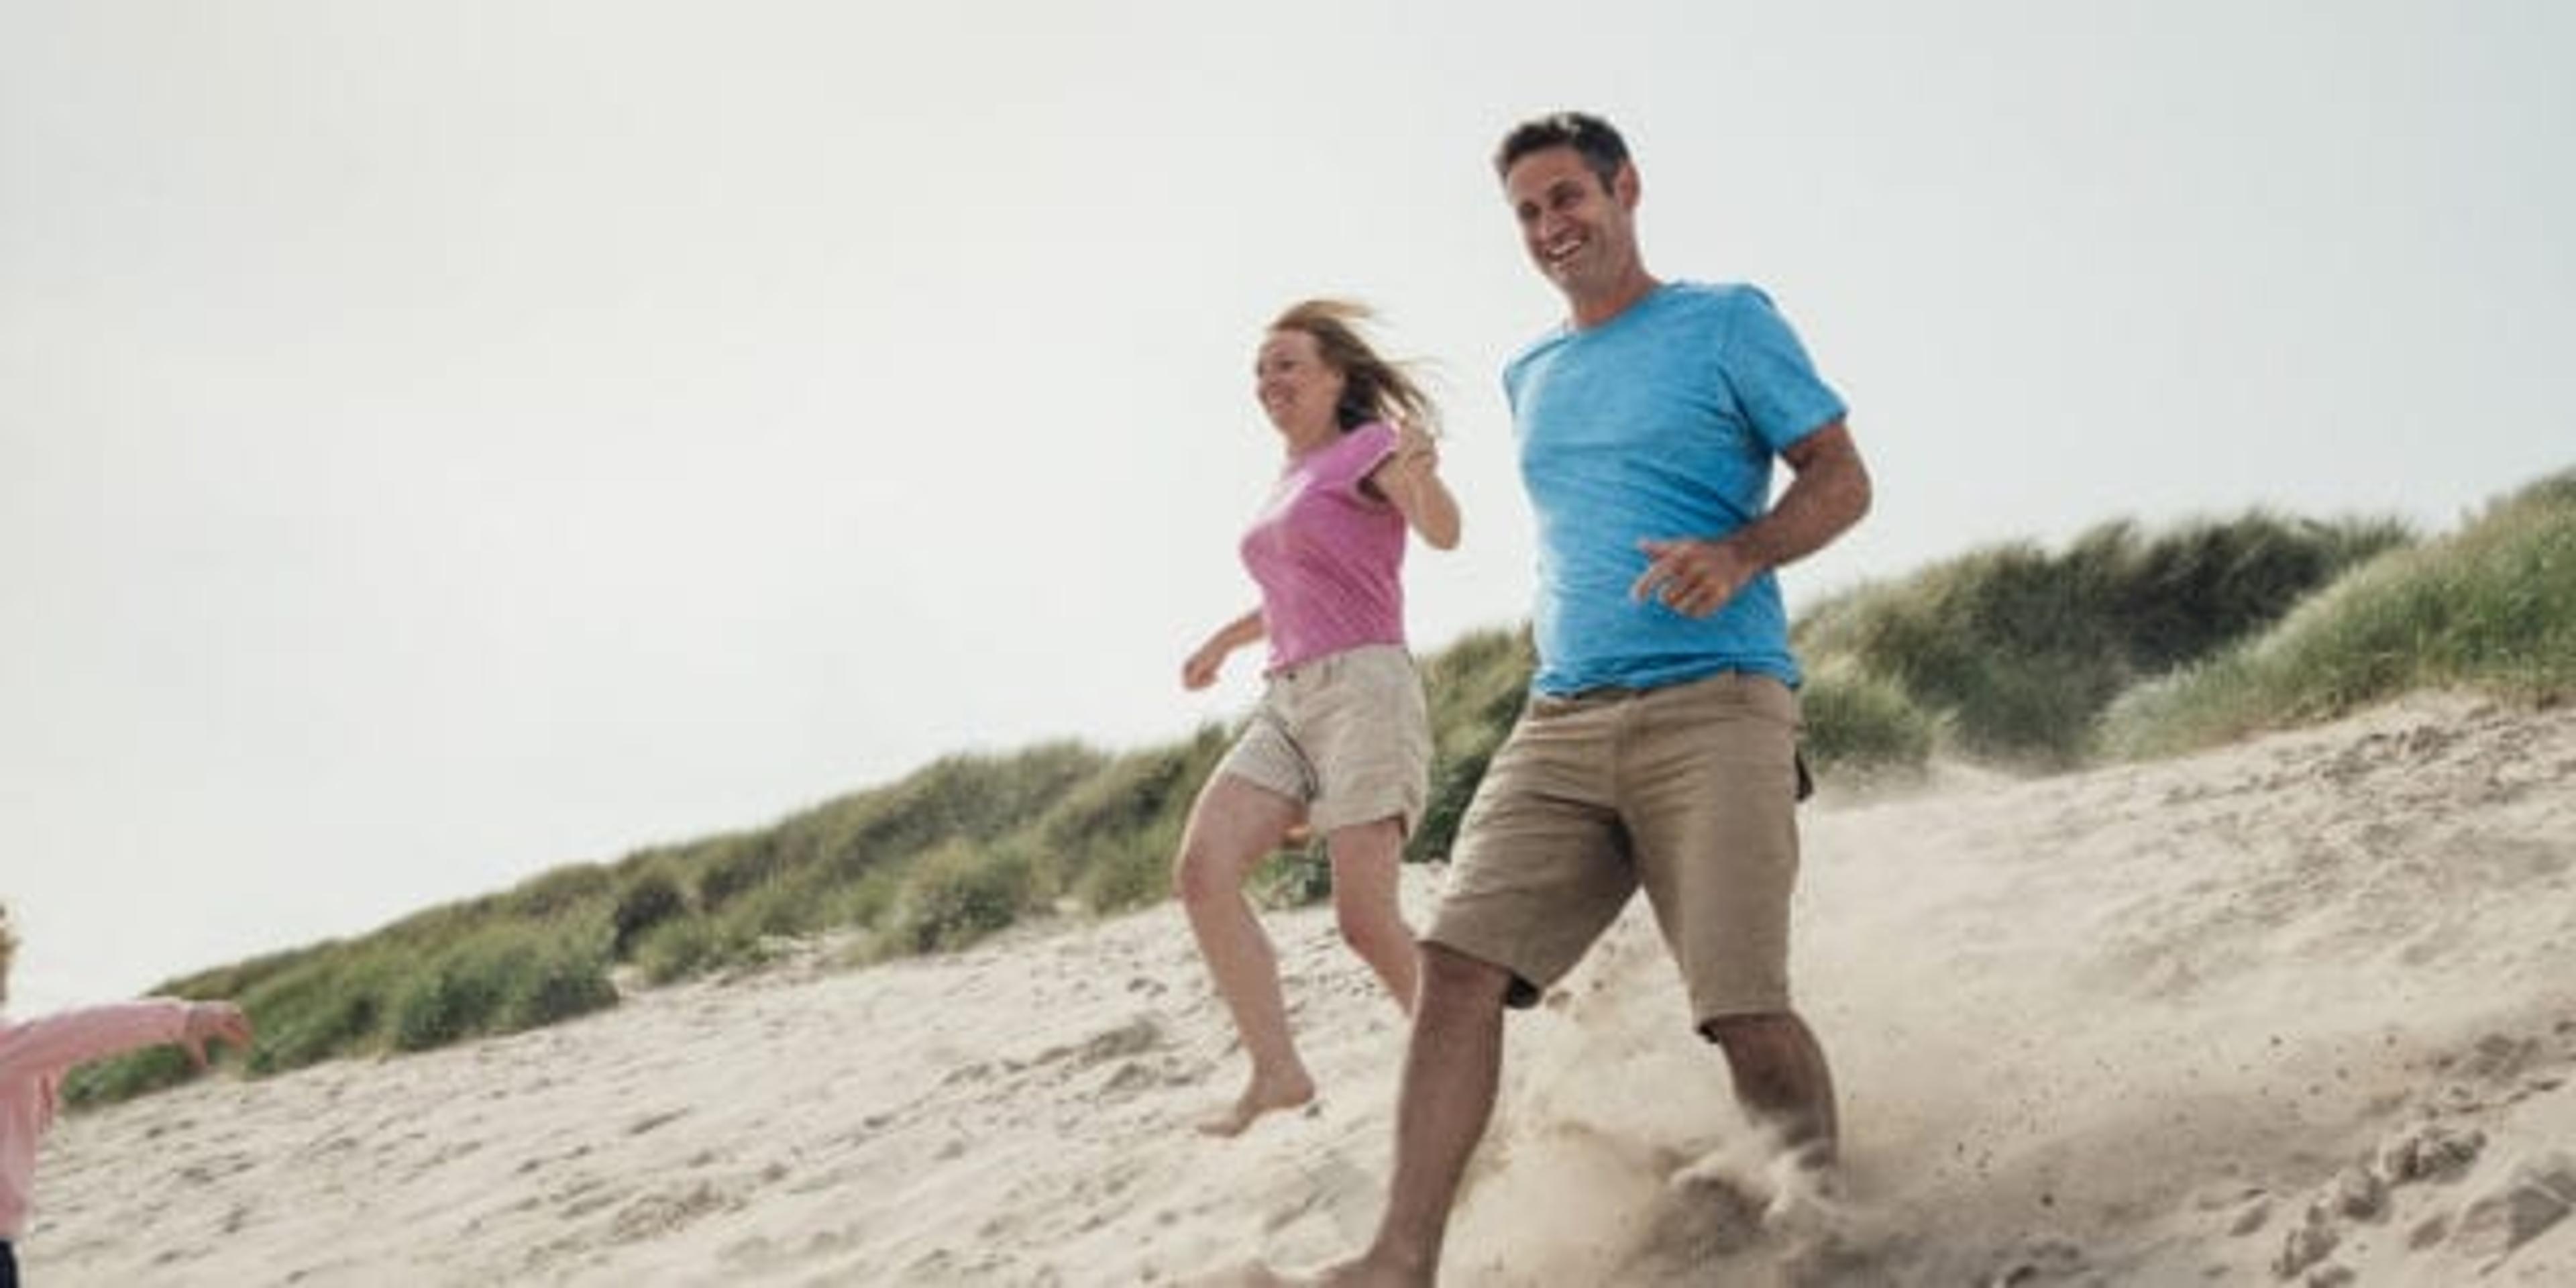 Low angle view of couple racing down a sand dune while on holiday at the seaside.